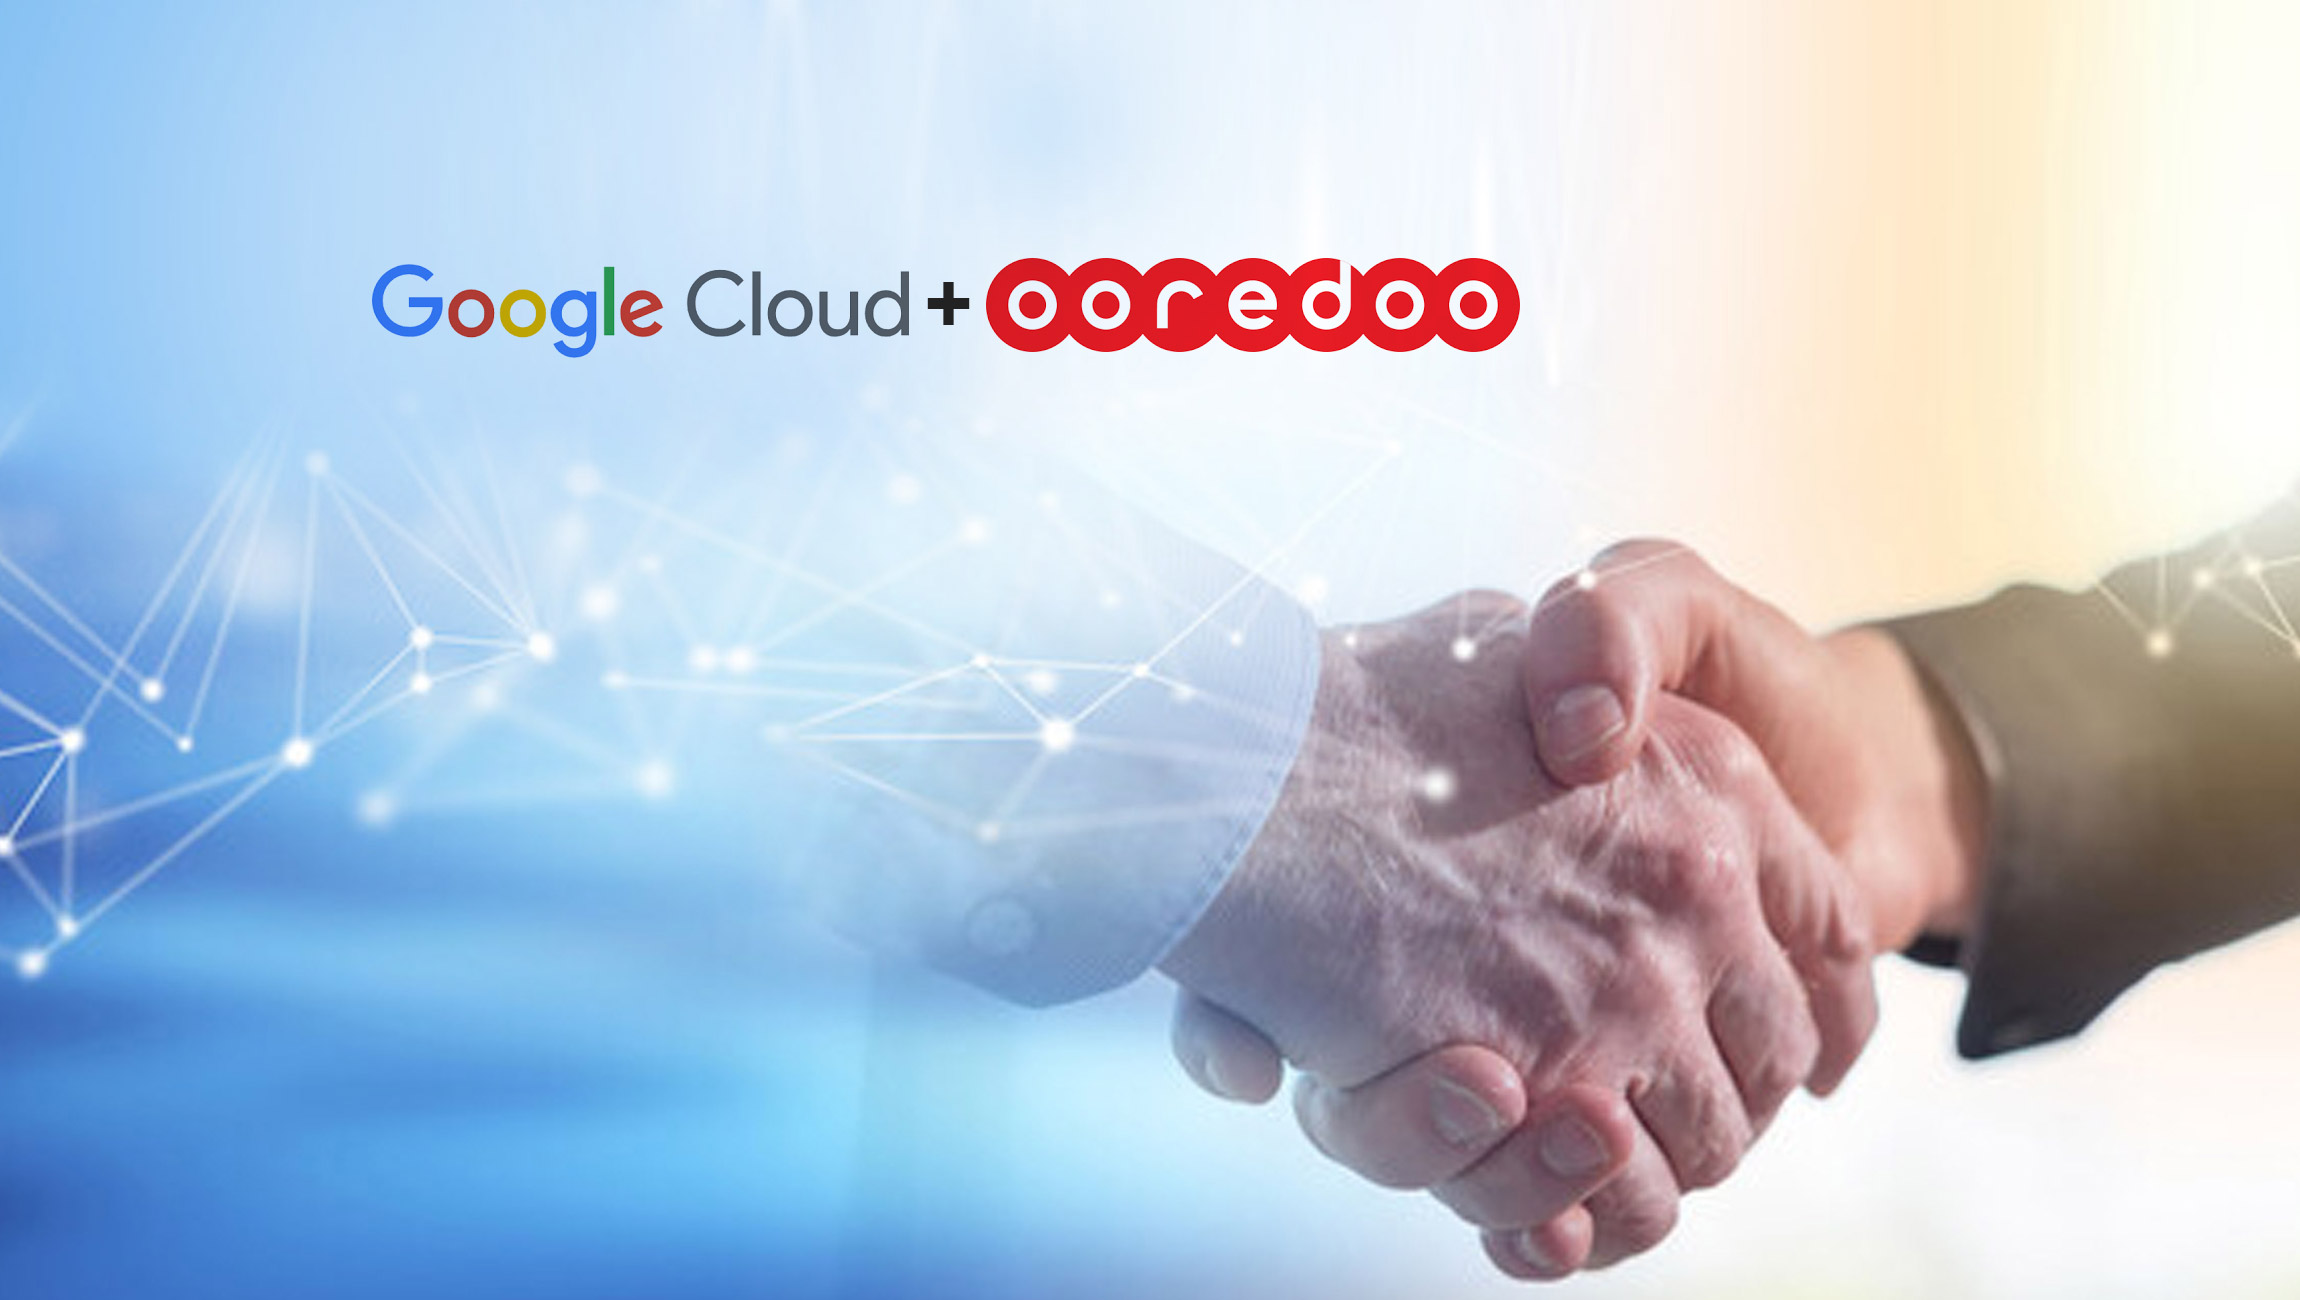 Google-Cloud-and-Ooredoo-Group-sign-MoU-at-Mobile-World-Congress-2022-to-advance-Ooredoo's-digital-offerings